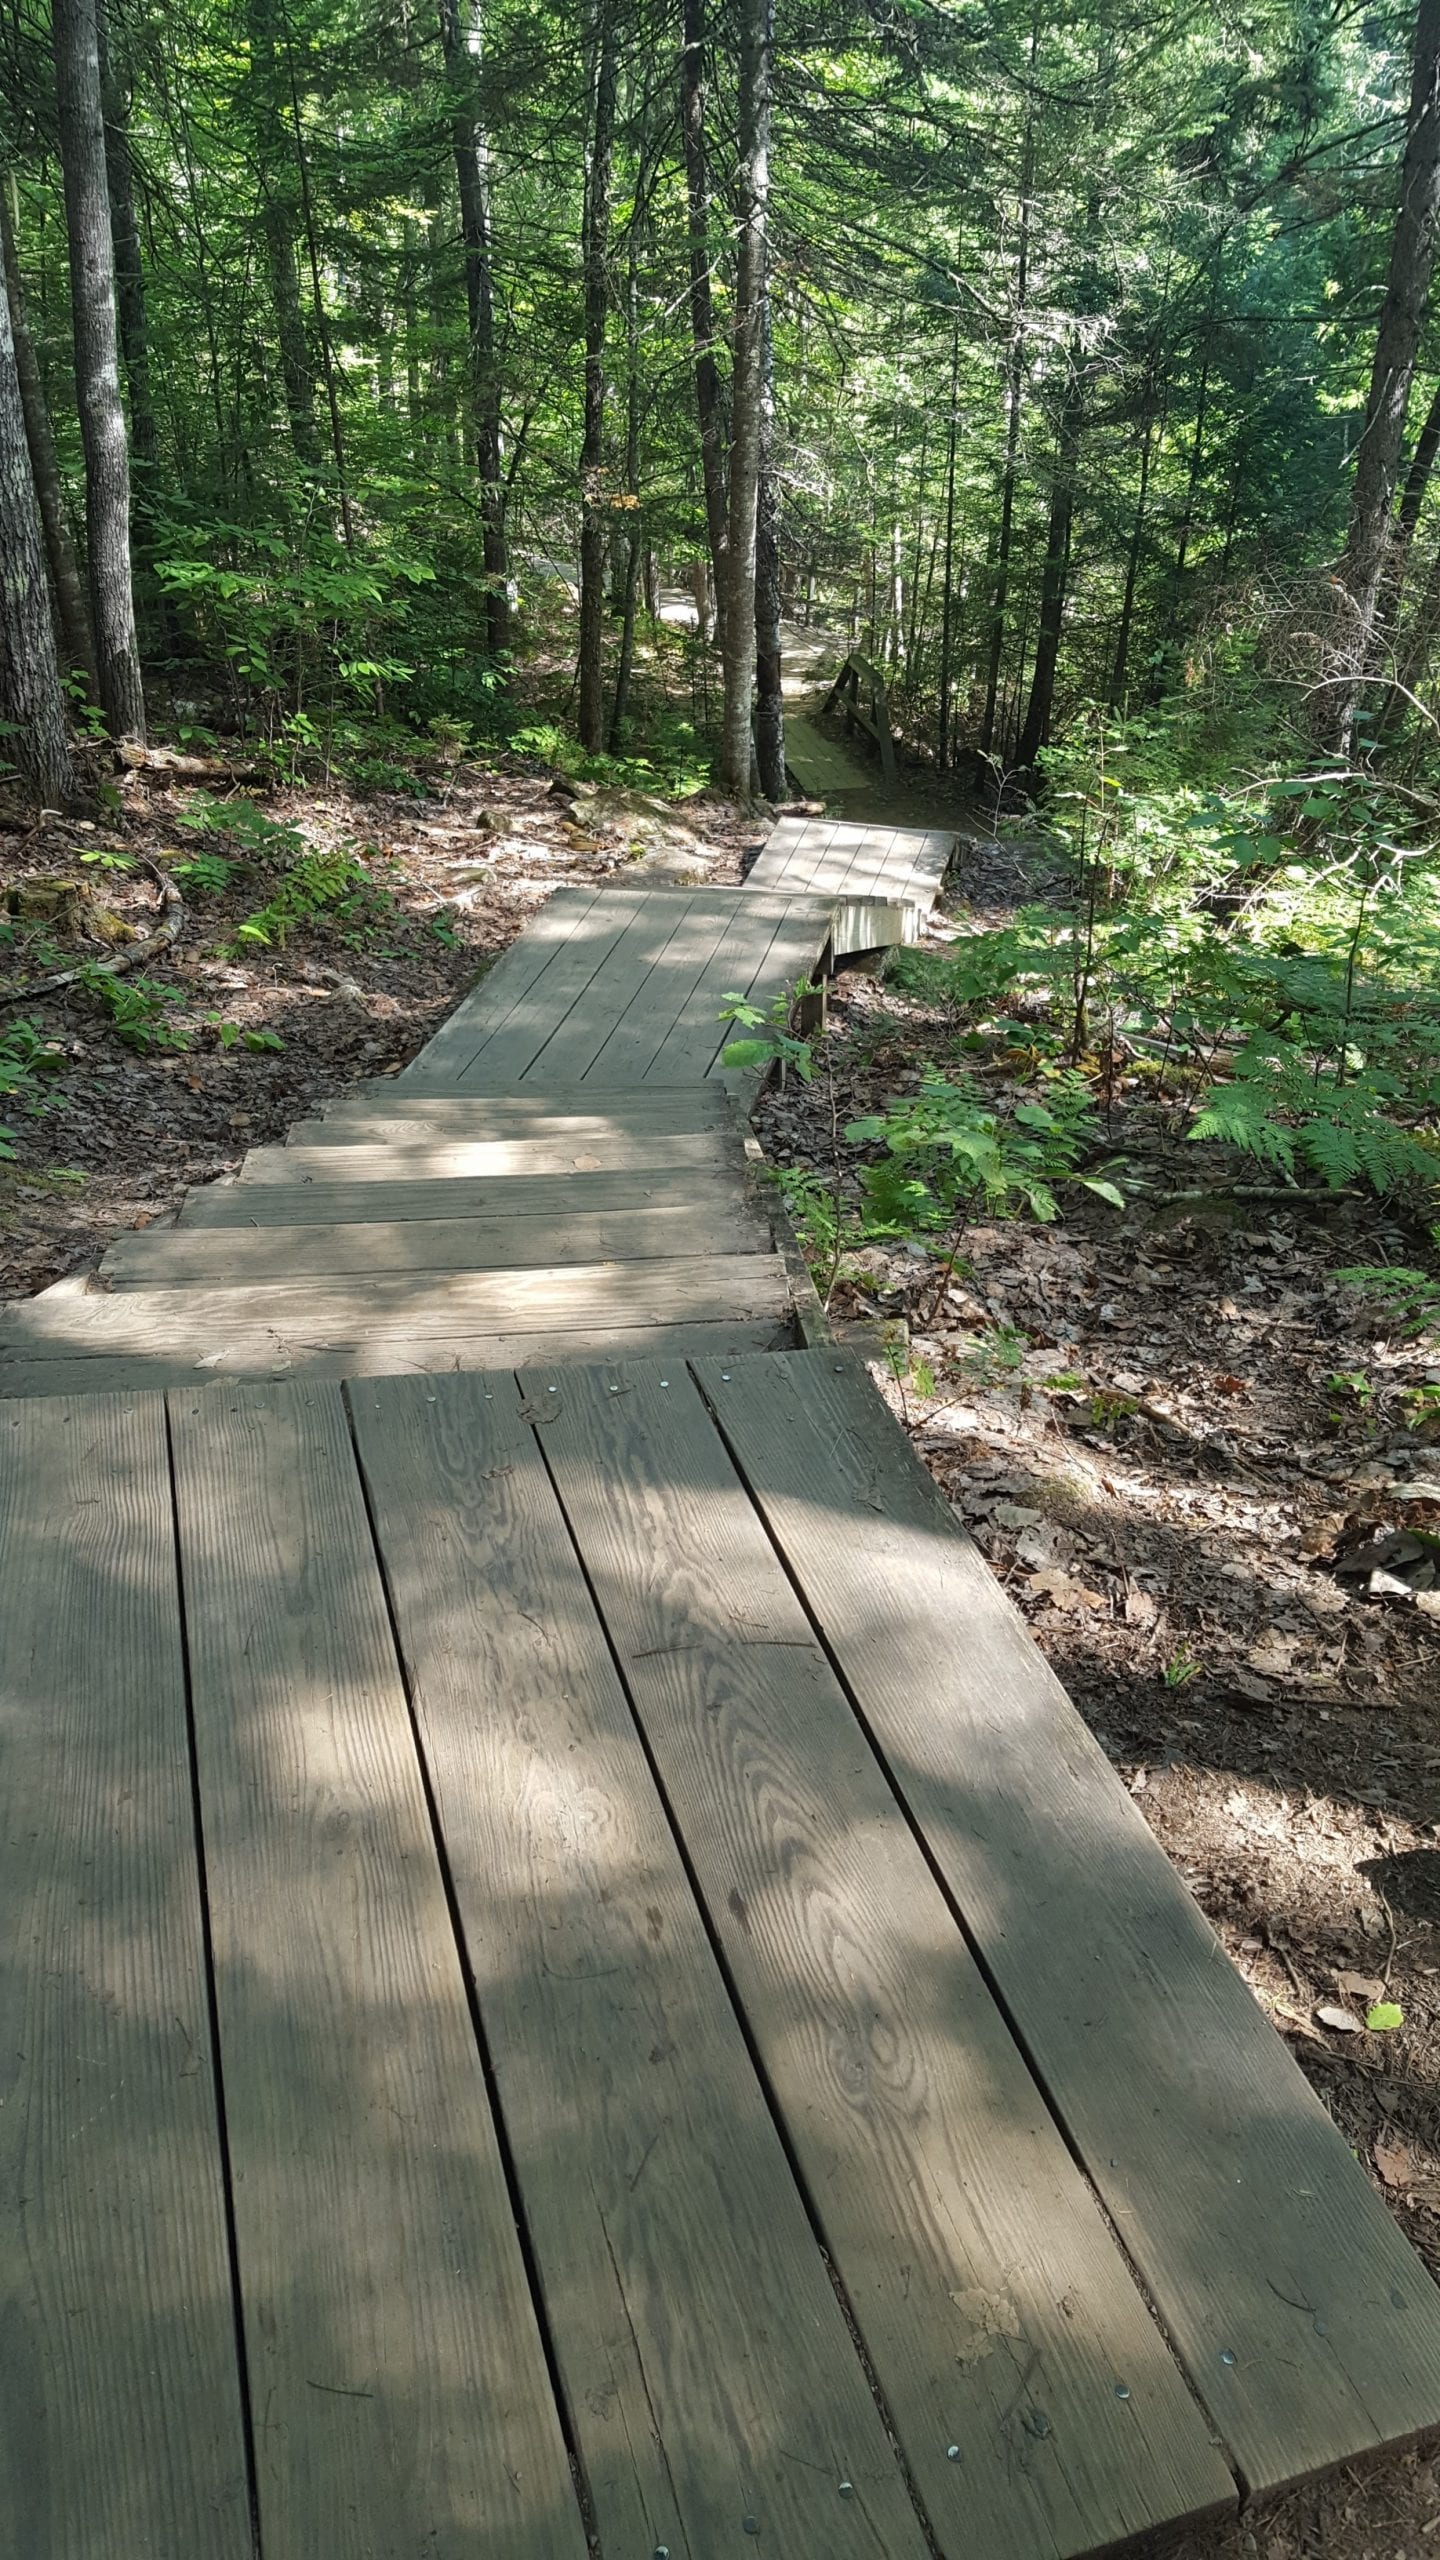 There are several boardwalks and sets of wooden stairs on the way to Moxie Falls.